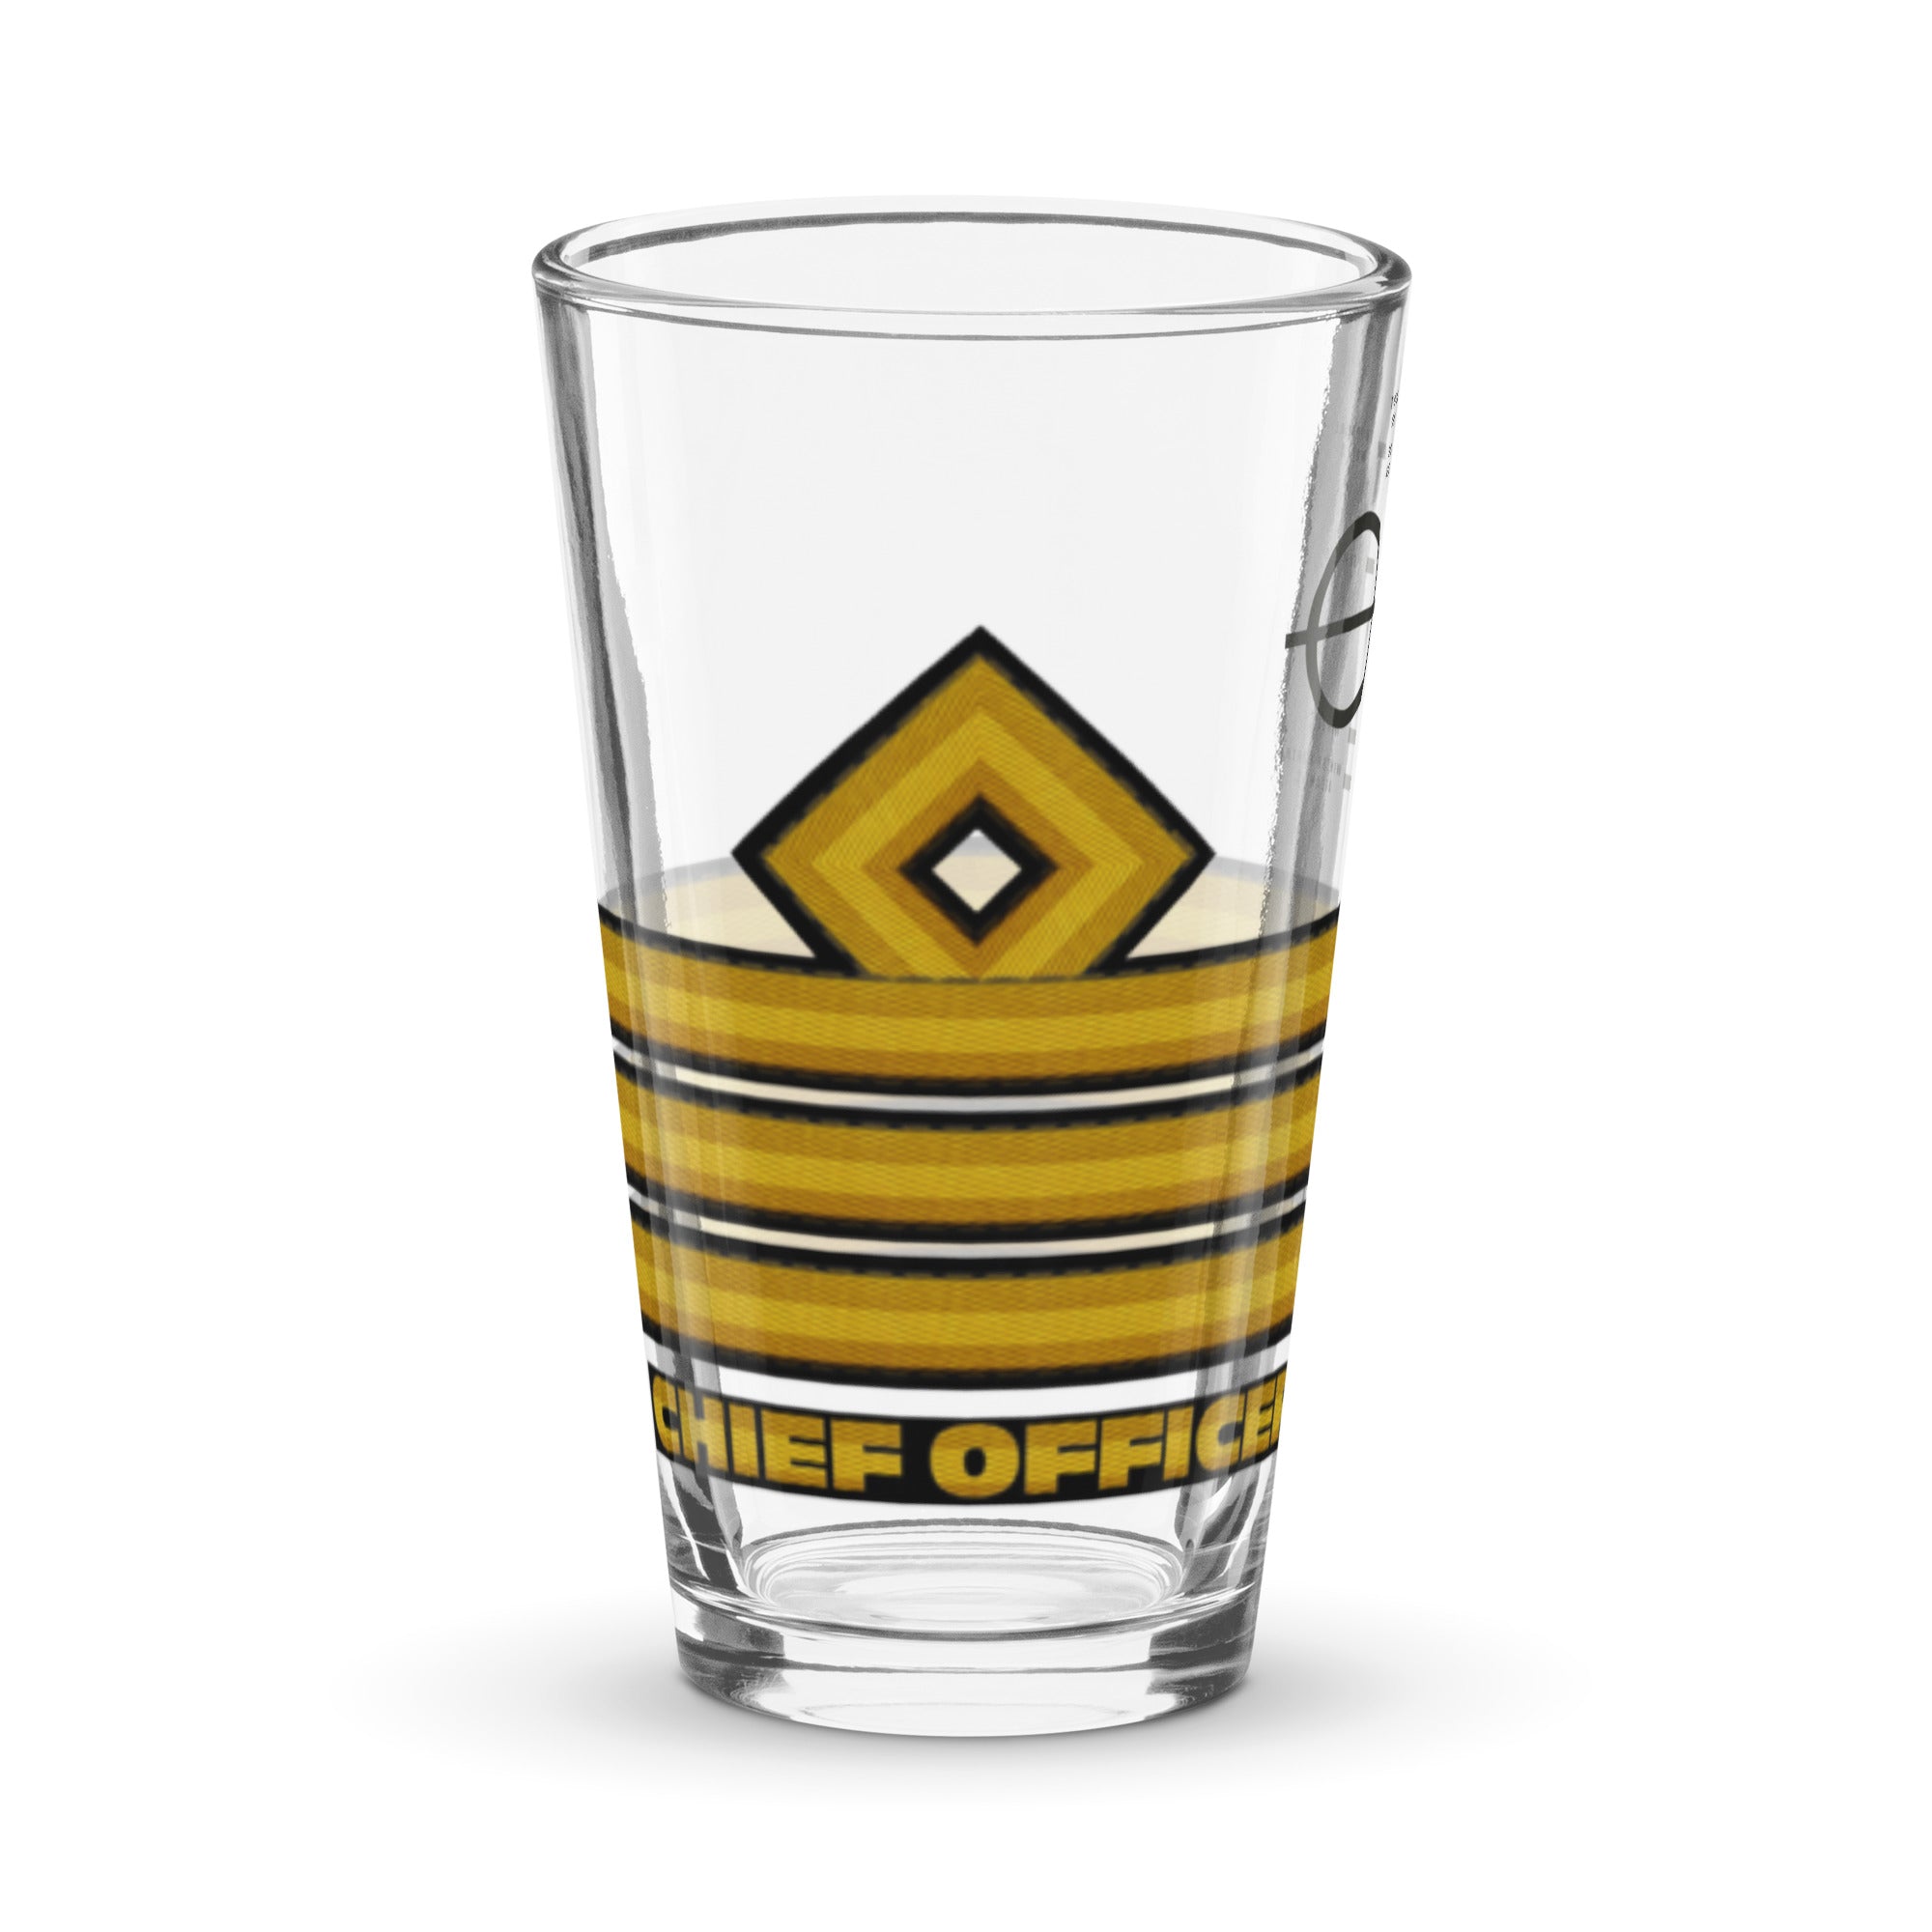 Chief Officer glass